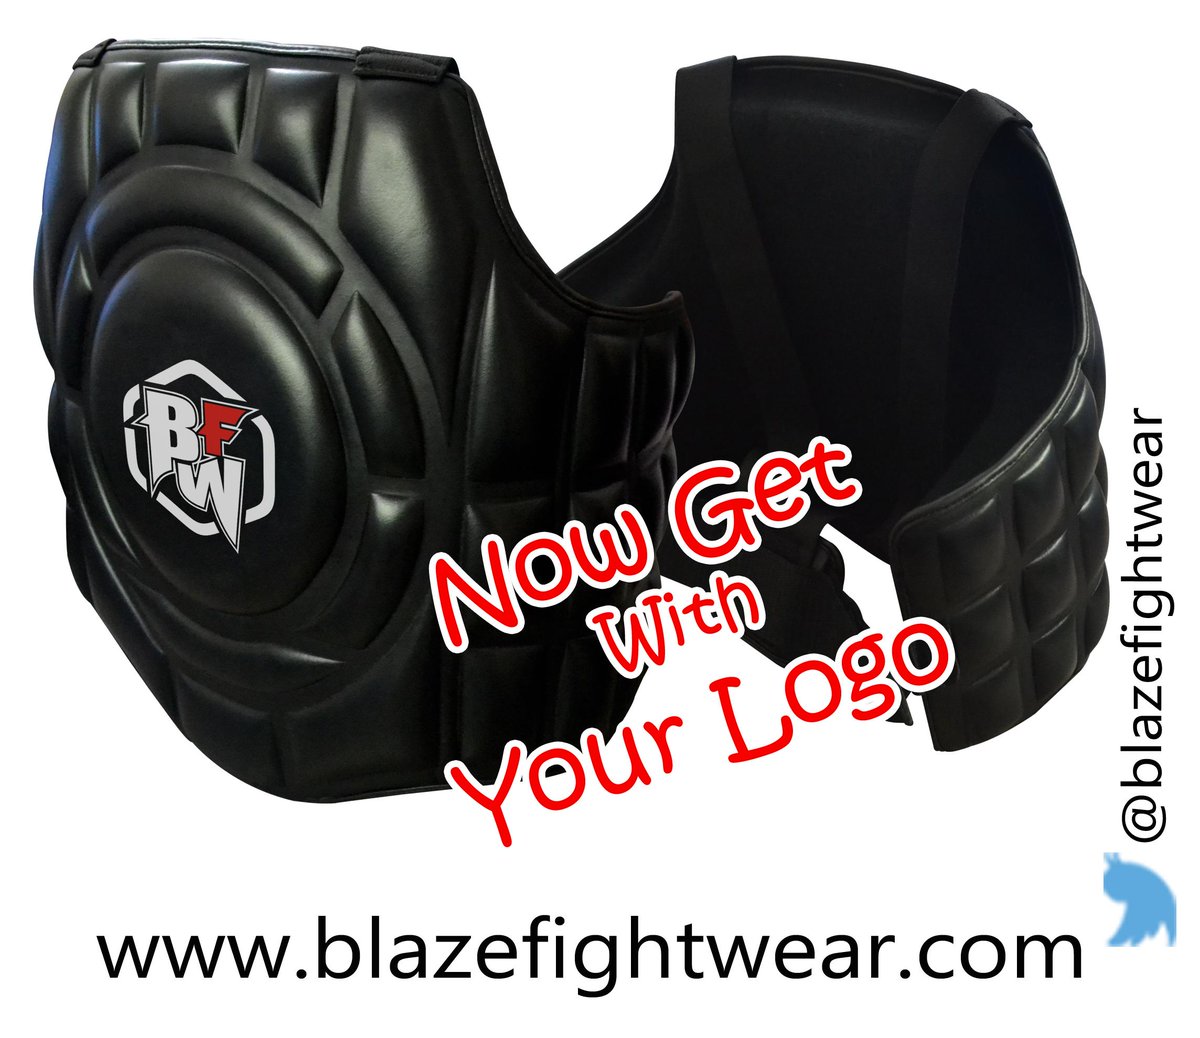 'BLAZE FIGHTWEAR'S'Molded Body Sheild
Descriptions:
Made of Synthetic Leather / Cowhide Leather 
Colors: All